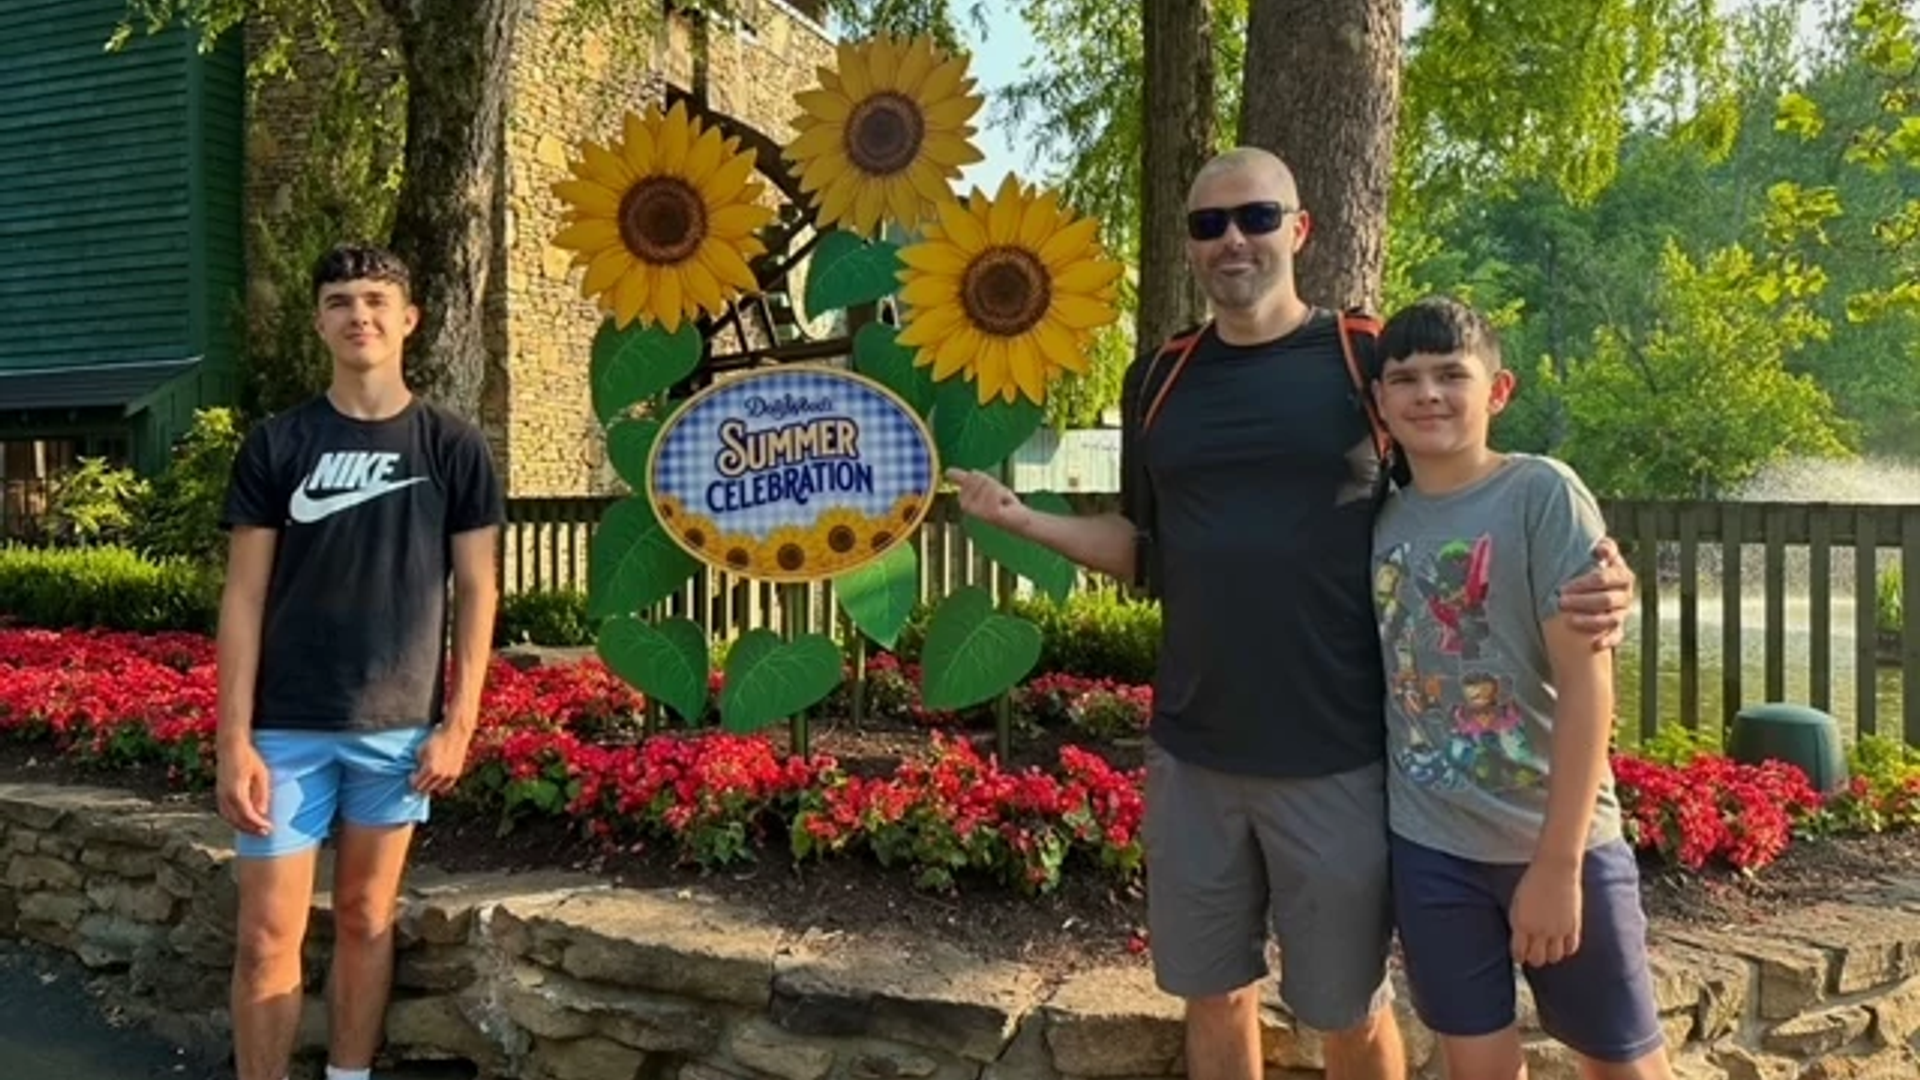 Summertime is a family favorite at Dollywood!